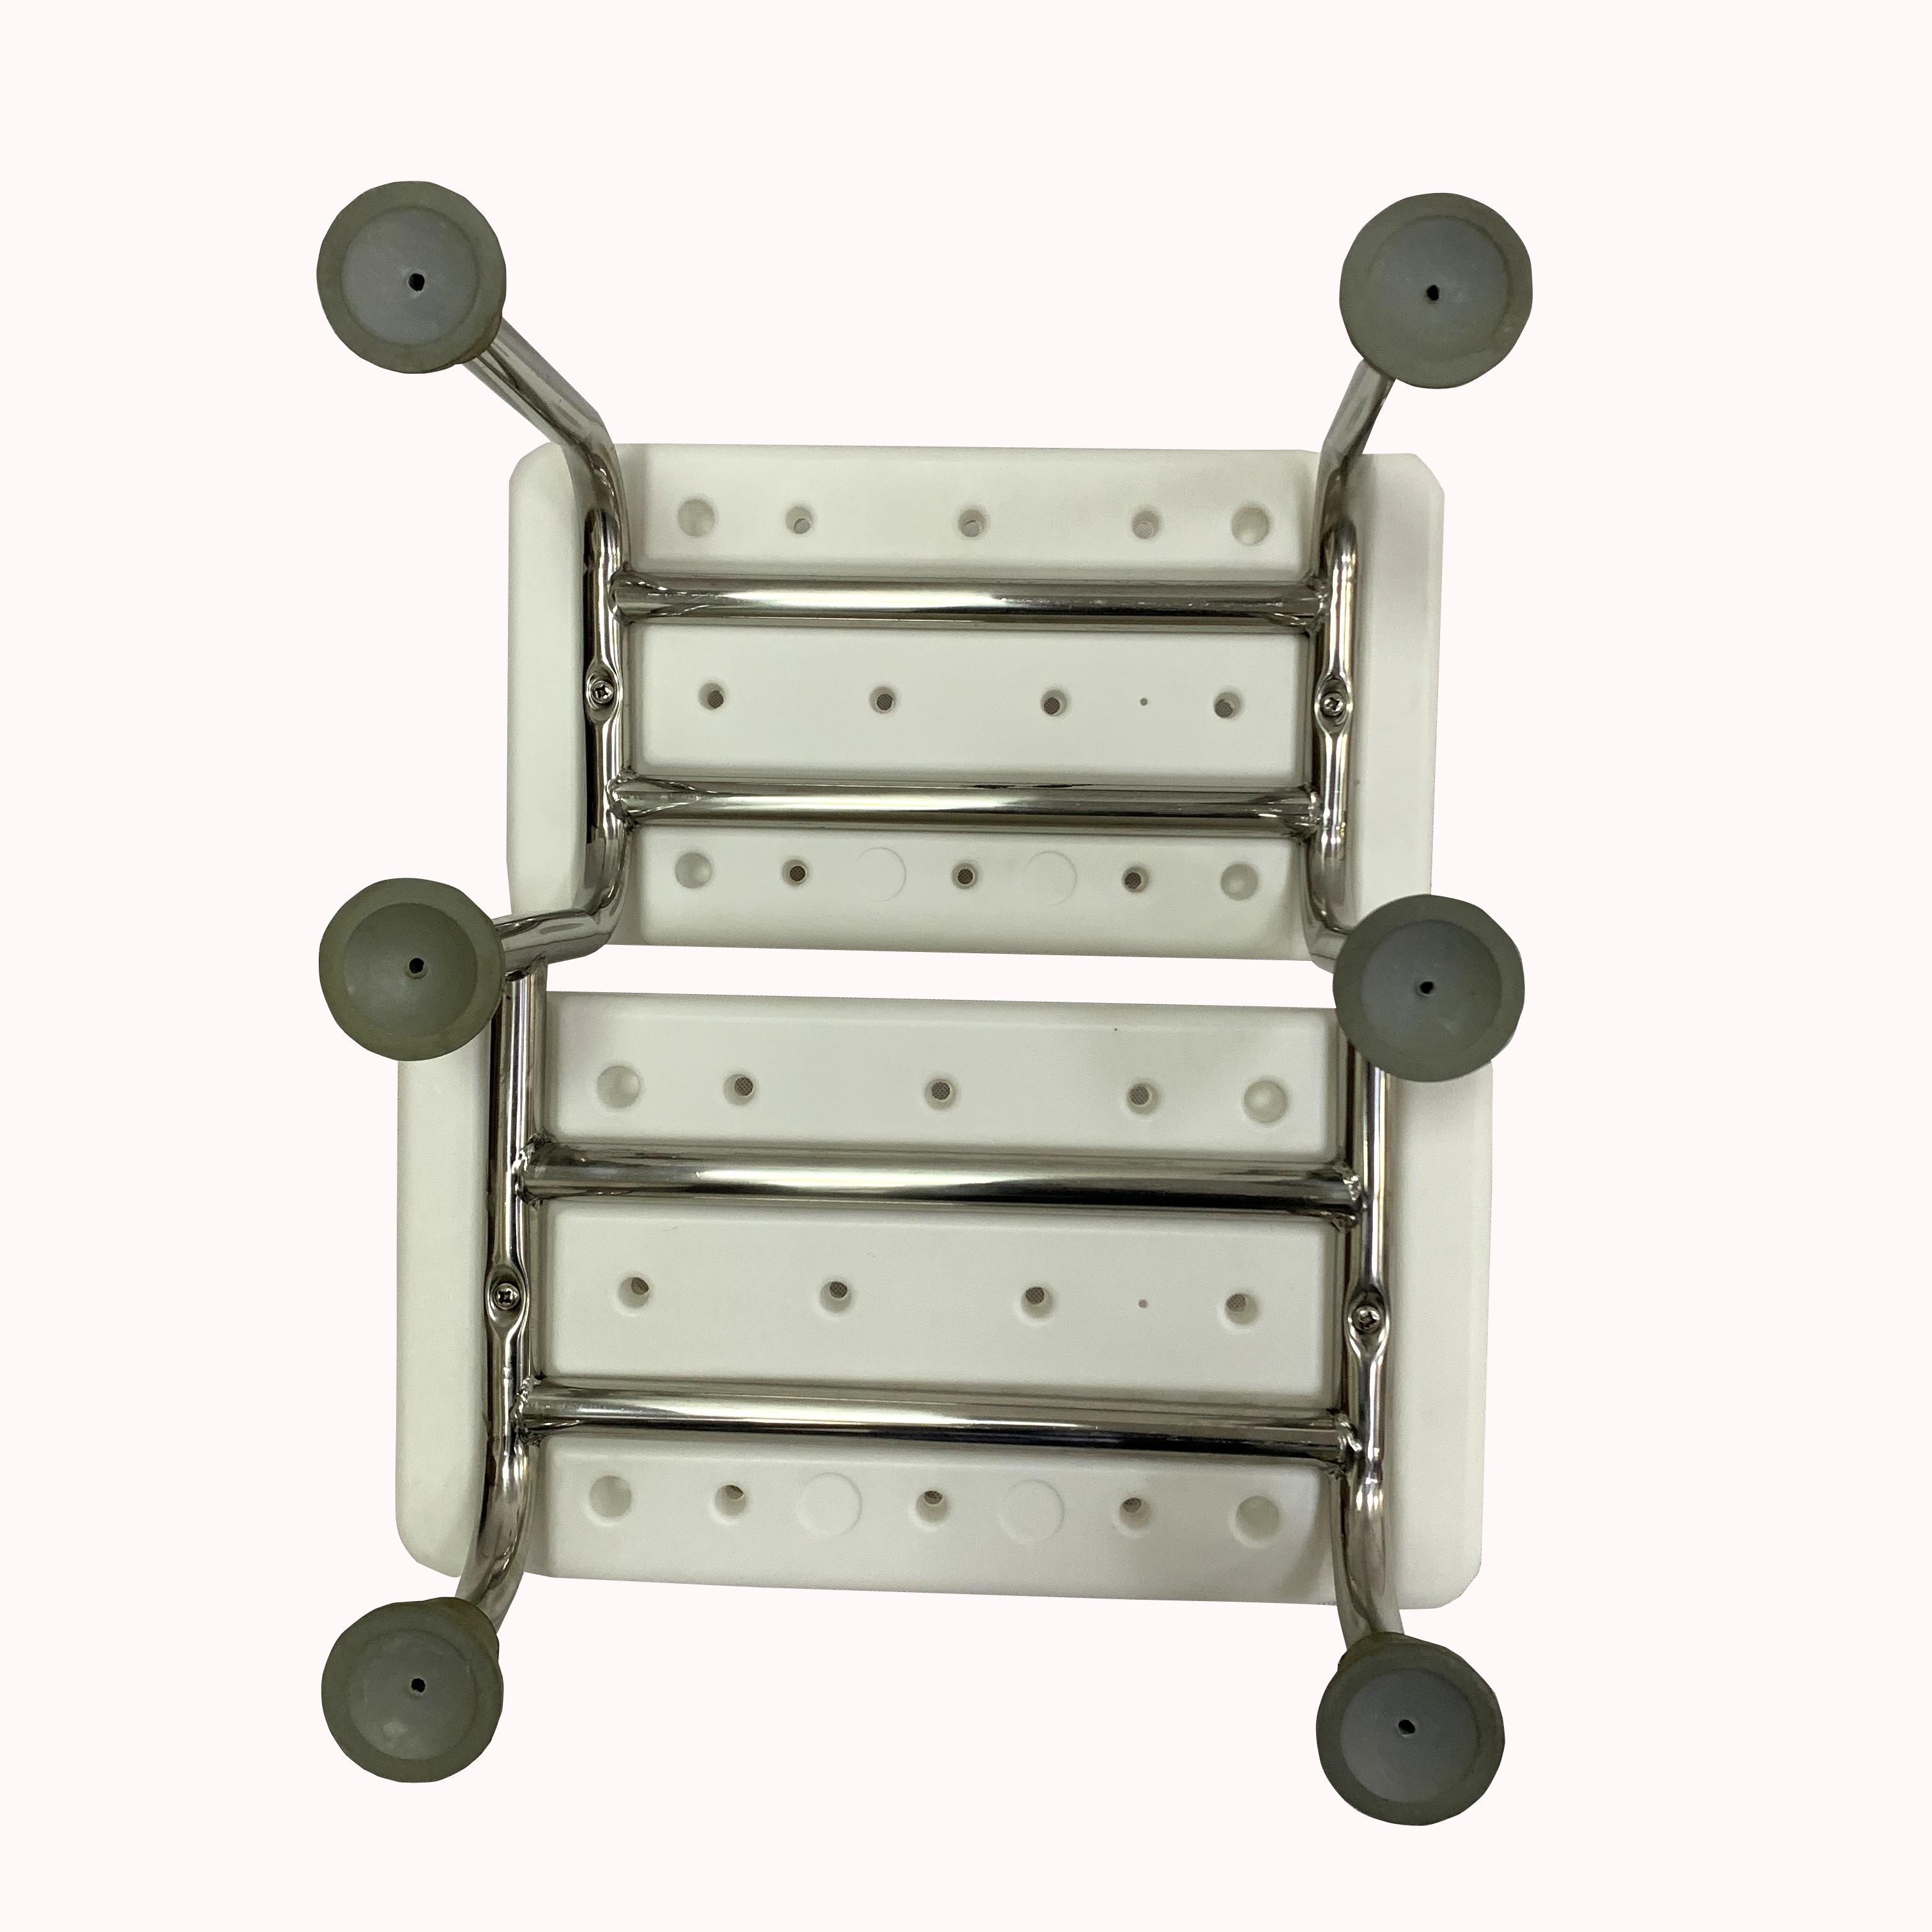 Stainless Steel Two-step Stool for Bathroom Anti-slip and Sturdy